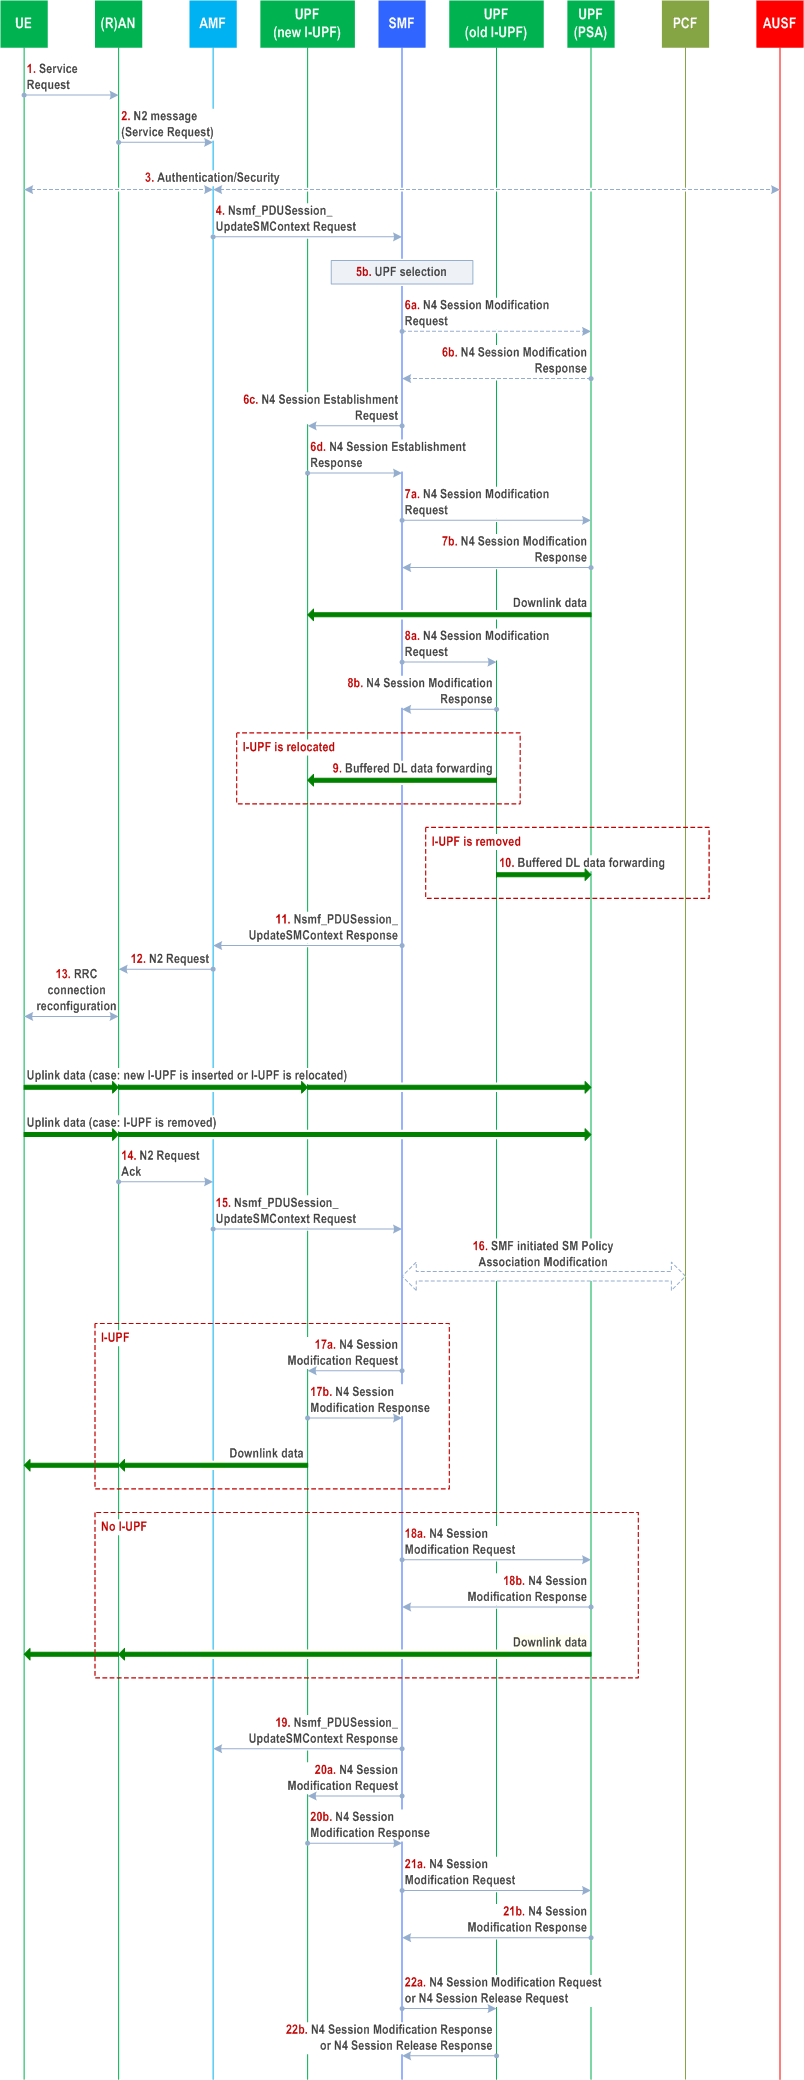 Reproduction of 3GPP TS 23.502, Fig. 4.2.3.2-1: UE Triggered Service Request procedure